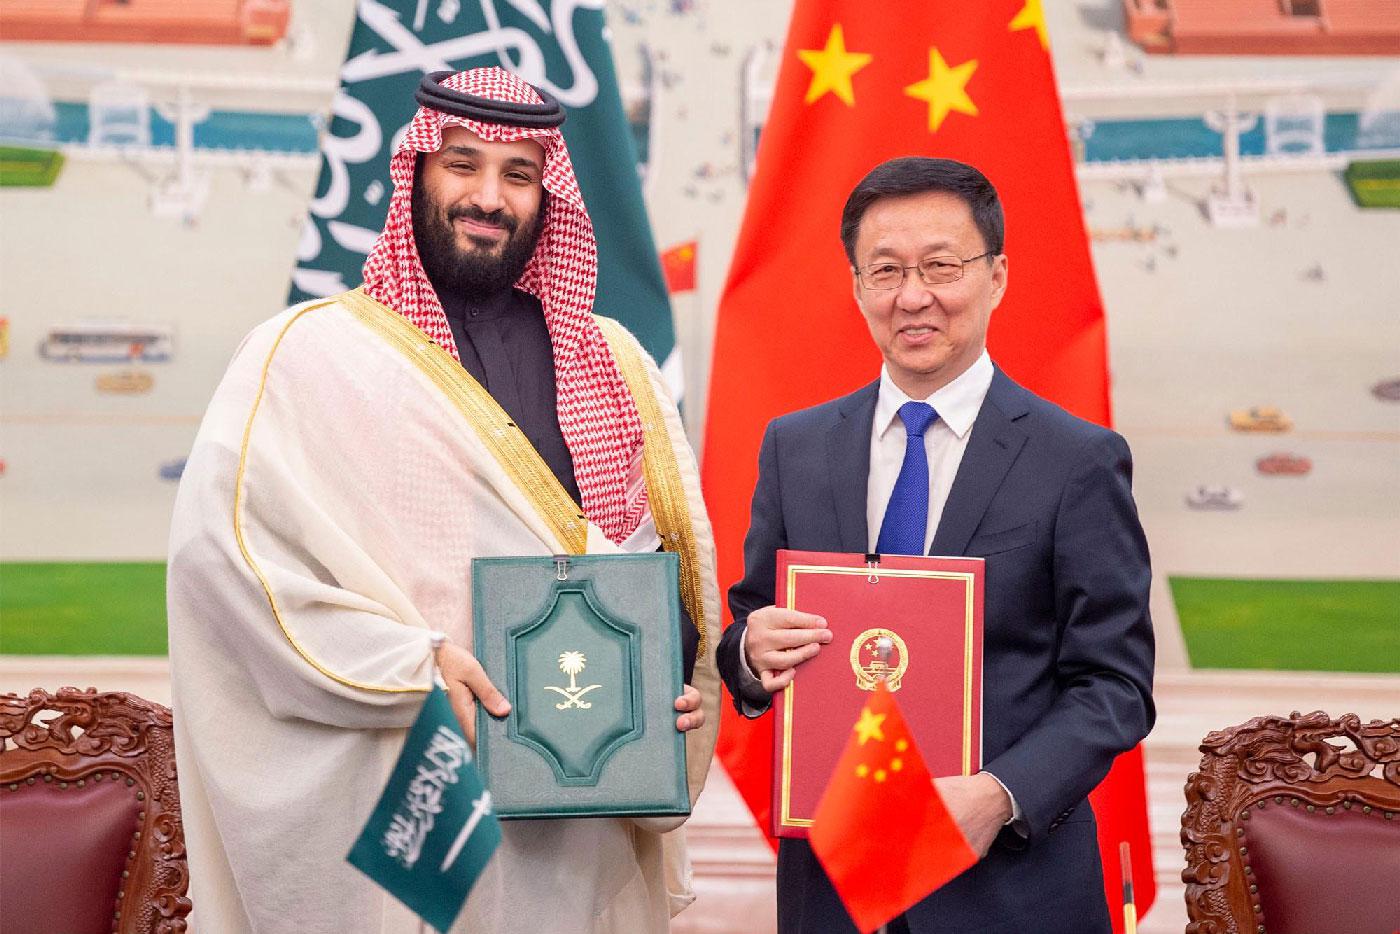 Saudi Crown Prince Mohammed bin Salman bin Abdulaziz Al Saud (L) and Han Zheng, Vice-Premier of the State Council of the People's Republic of China, pose for pictures during after the signing of memorandums of understanding at the Great Hall of the People in Beijing, China on 22 February 2019 . 